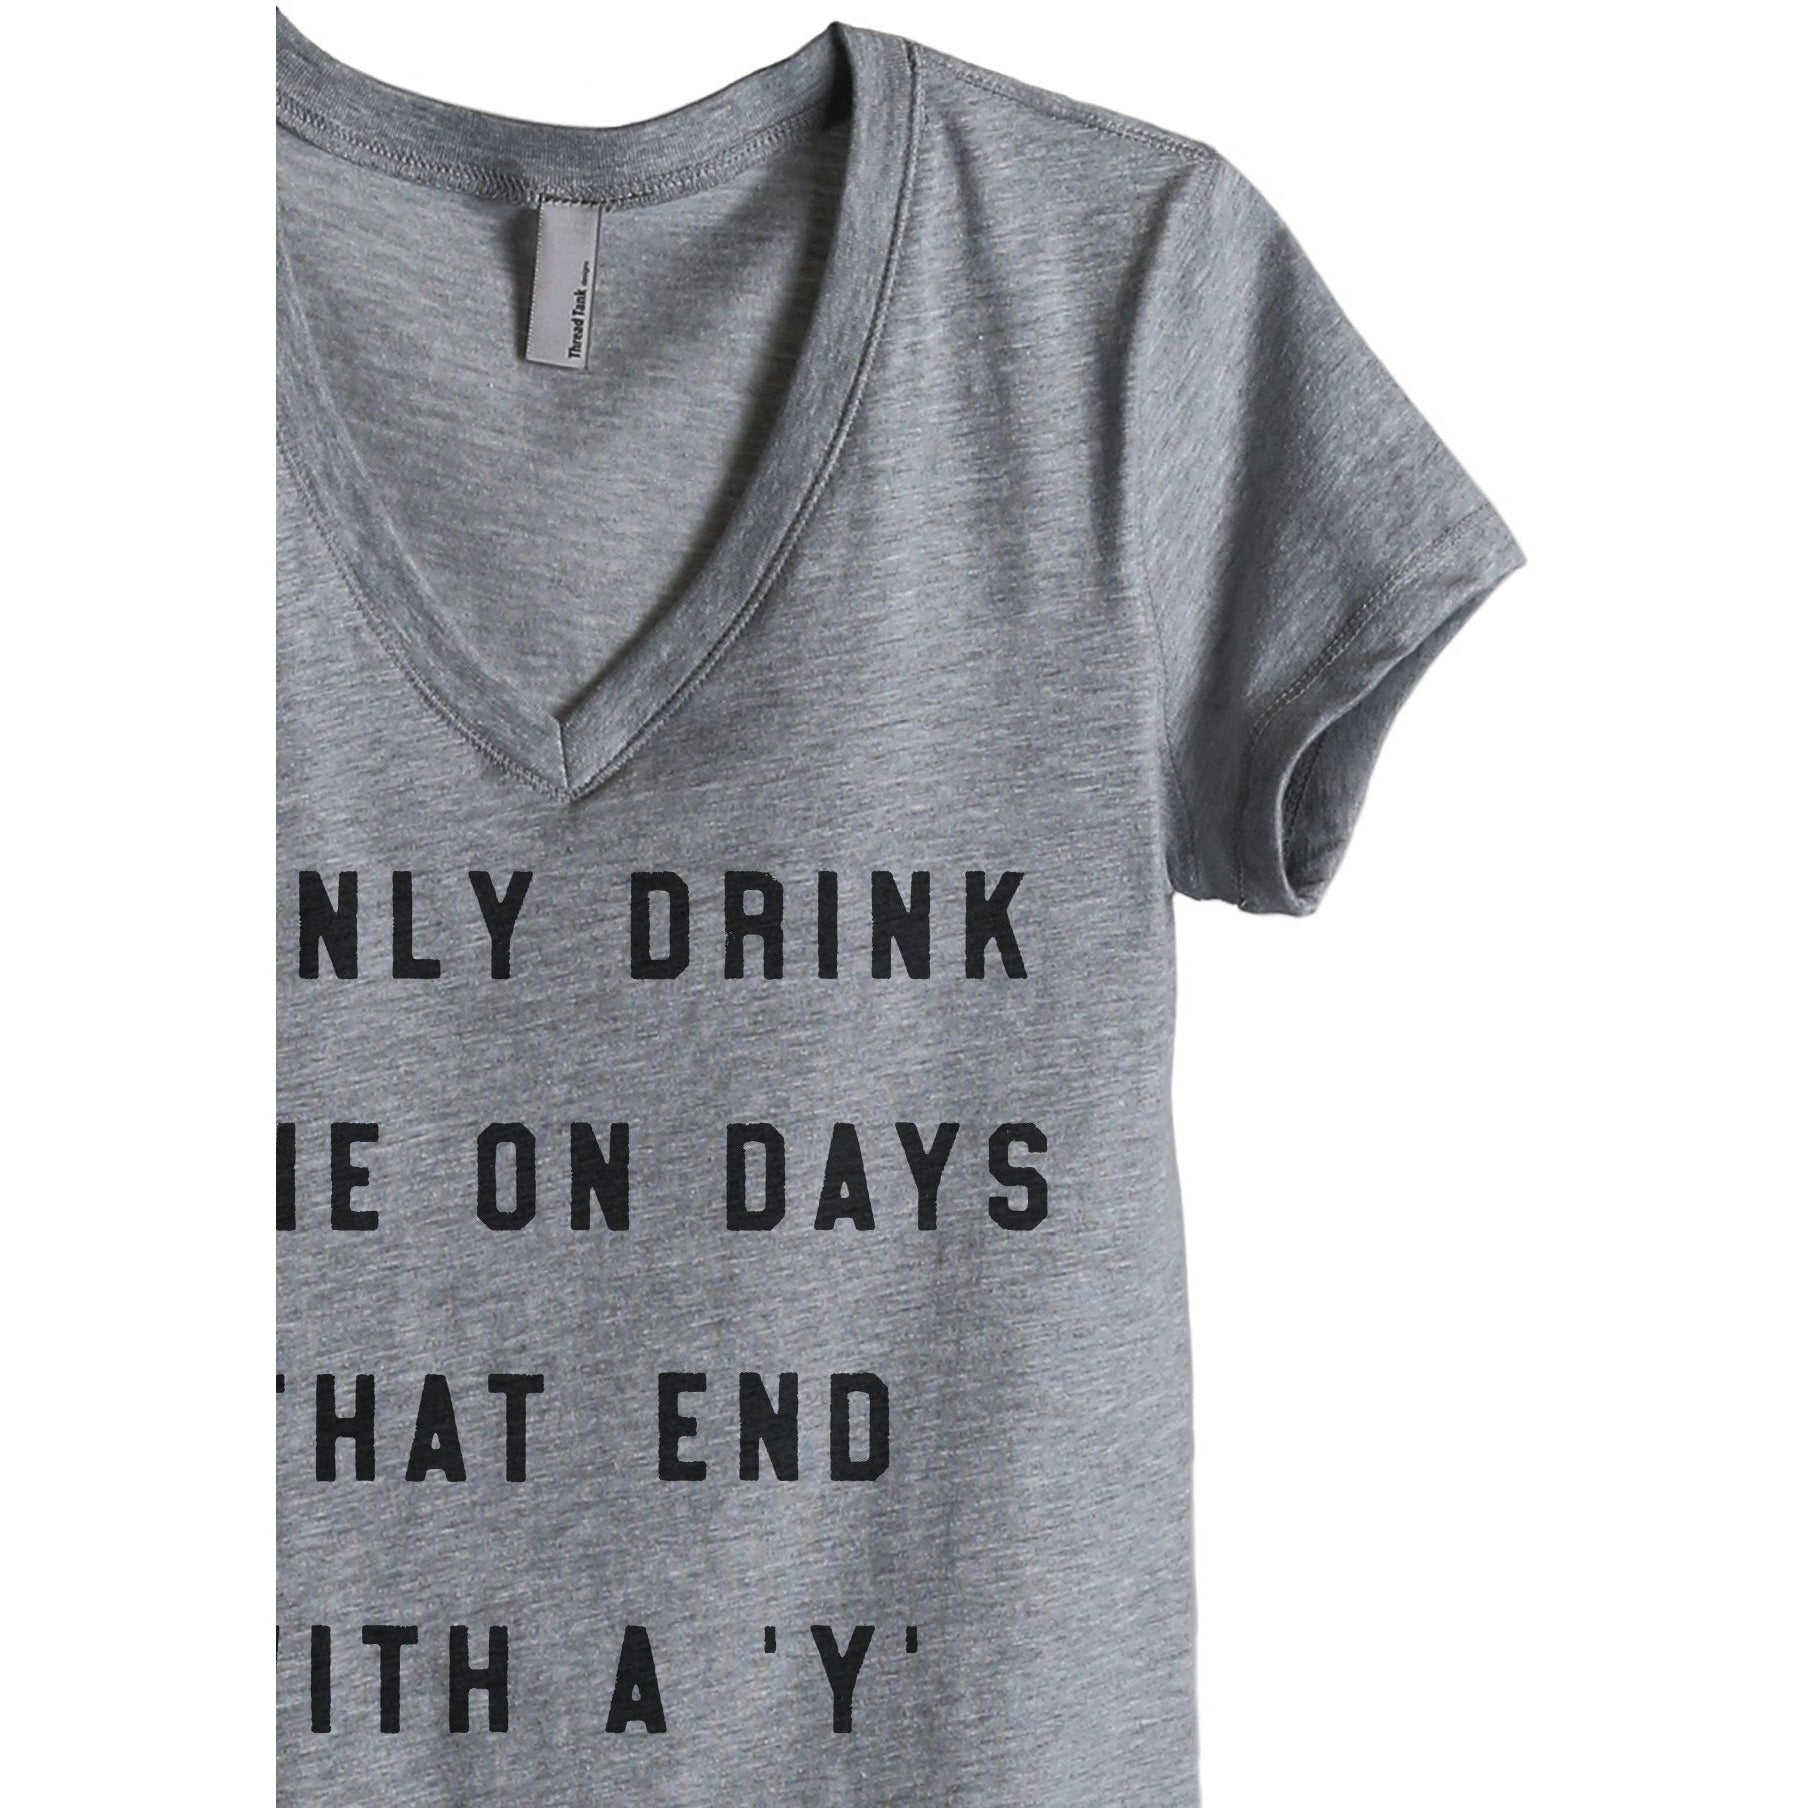 Drink Wine On Days Ends With Y Women's Relaxed Crewneck T-Shirt Top Tee Heather Grey Zoom Details
